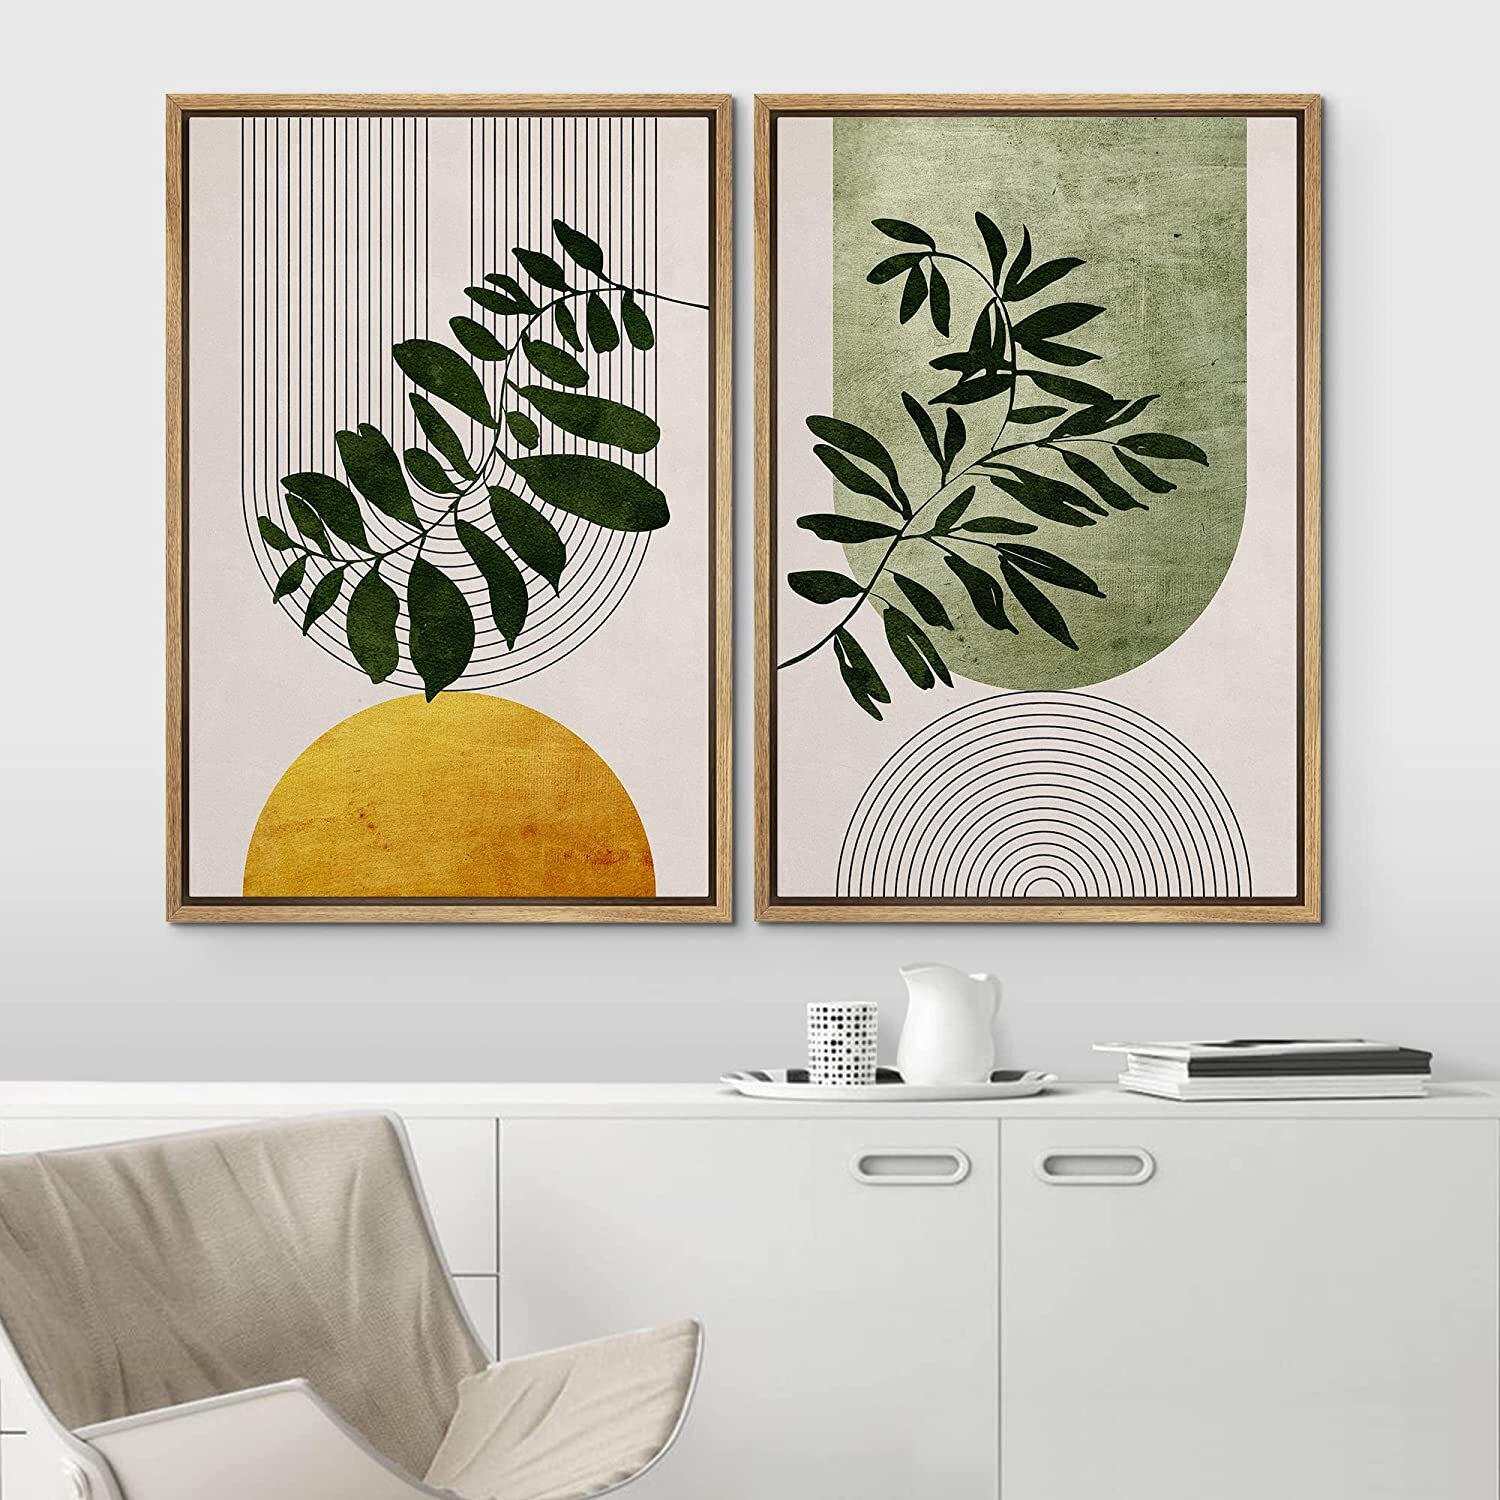 IDEA4WALL Framed Canvas Print Wall Art Set Mid-Century Geometric Forest  Plant Leaf Nature Wilderness Illustrations Modern Art Rustic Decorative For Living  Room, Bedroom, Officel 24